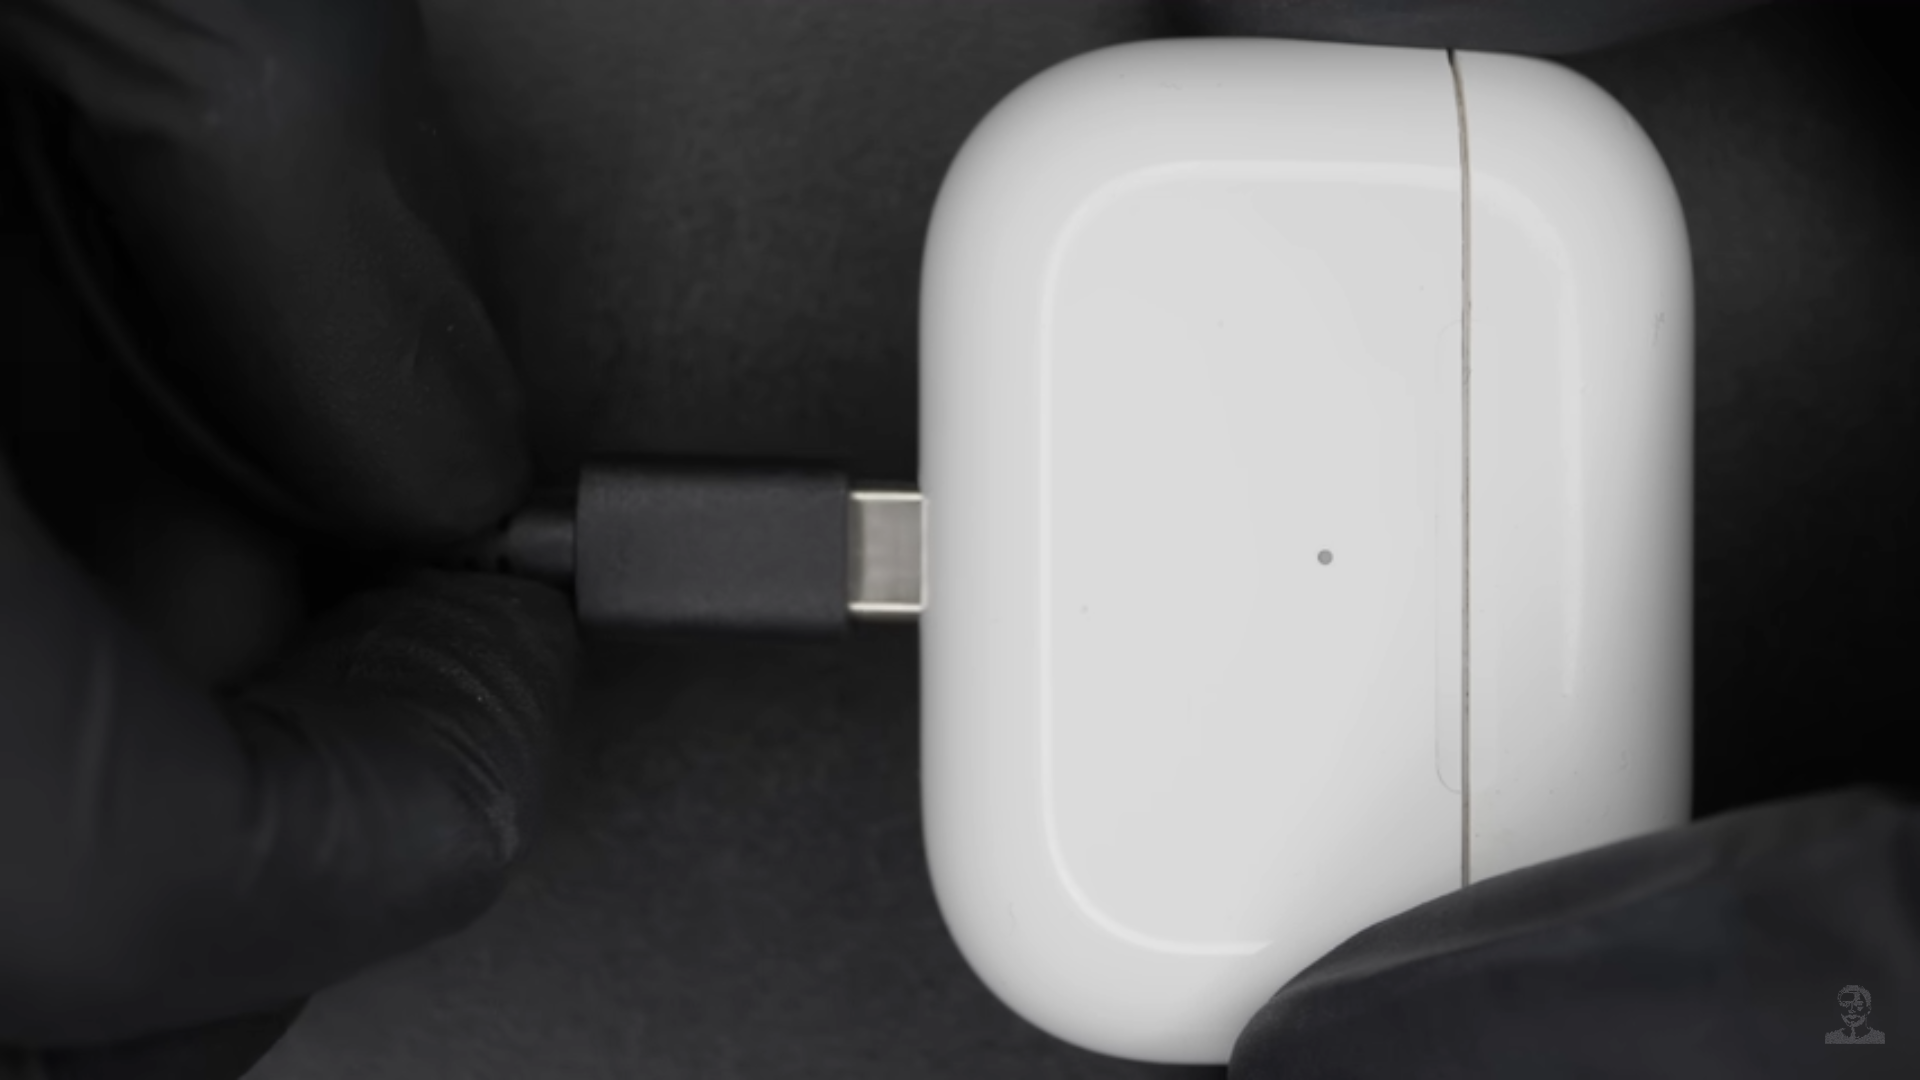 Apple AirPods Pro 2 with USB Type-C port likely to launch later